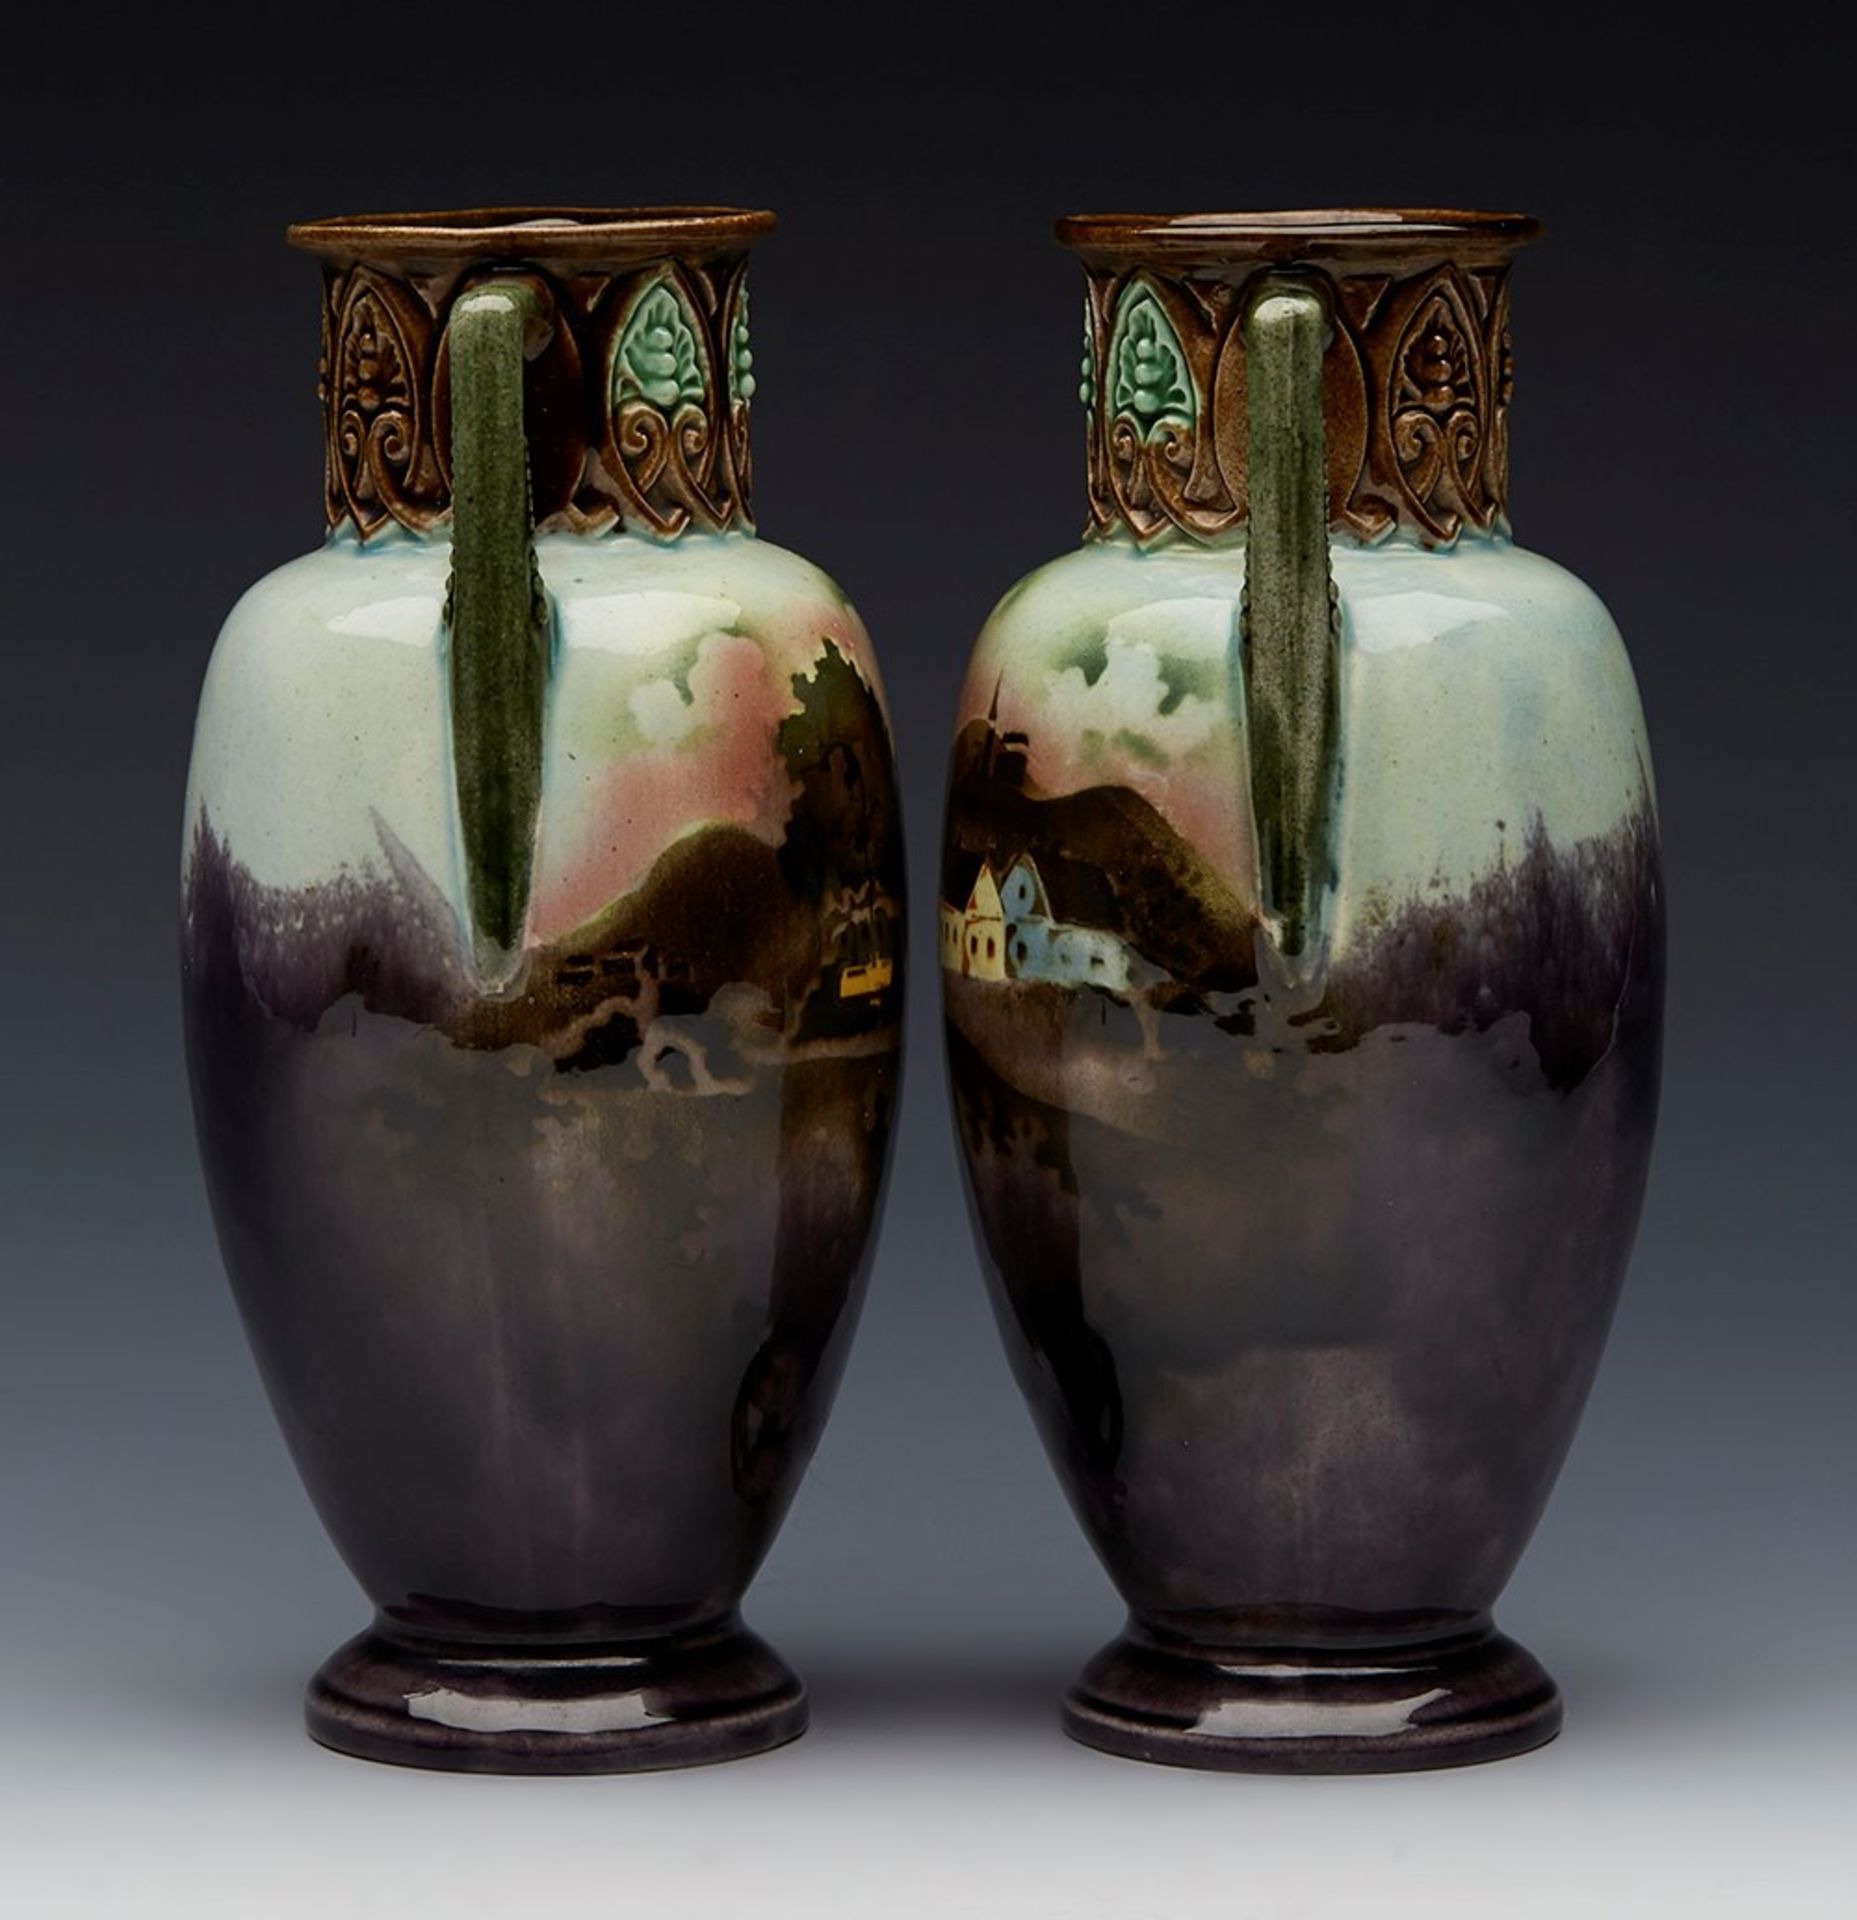 PAIR ANTIQUE CONTINENTAL MAJOLICA LANDSCAPE PAINTED VASES 19TH C.   DIMENSIONS   Height 17,5cm, - Image 8 of 9